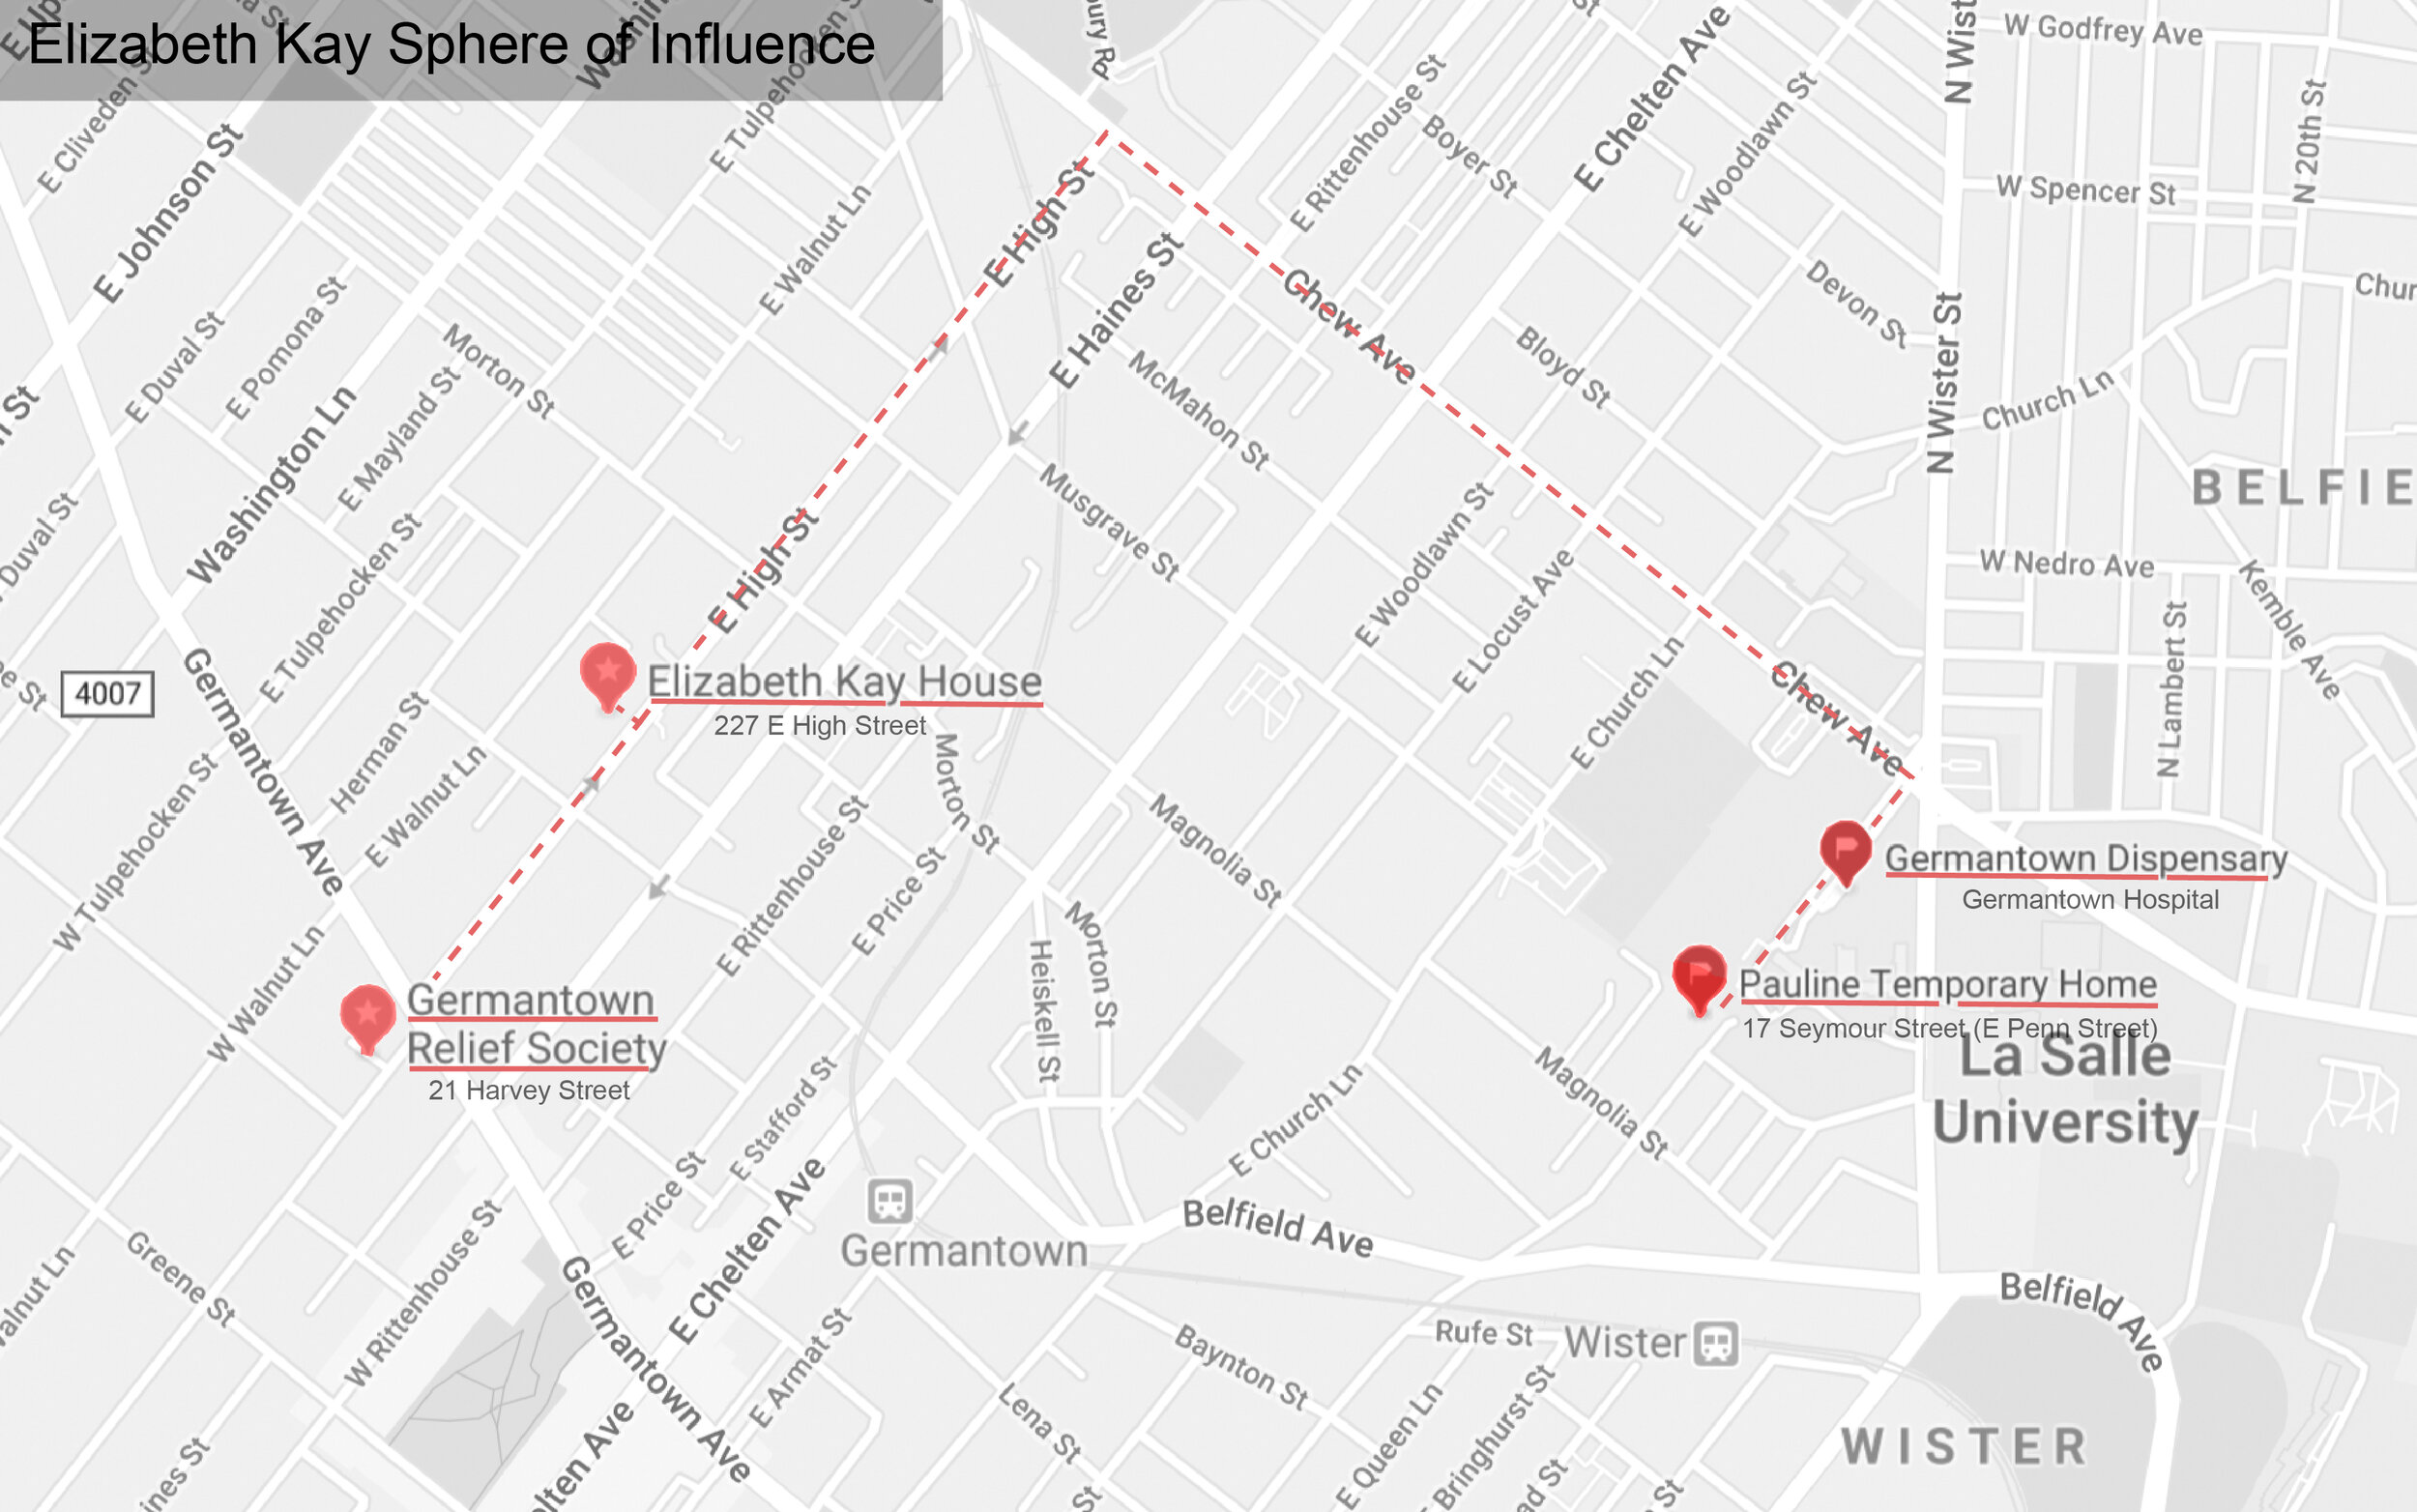  Figure 13: Sphere of influence for the life and works of Elizabeth Kay. (Google Maps modified by Author) 